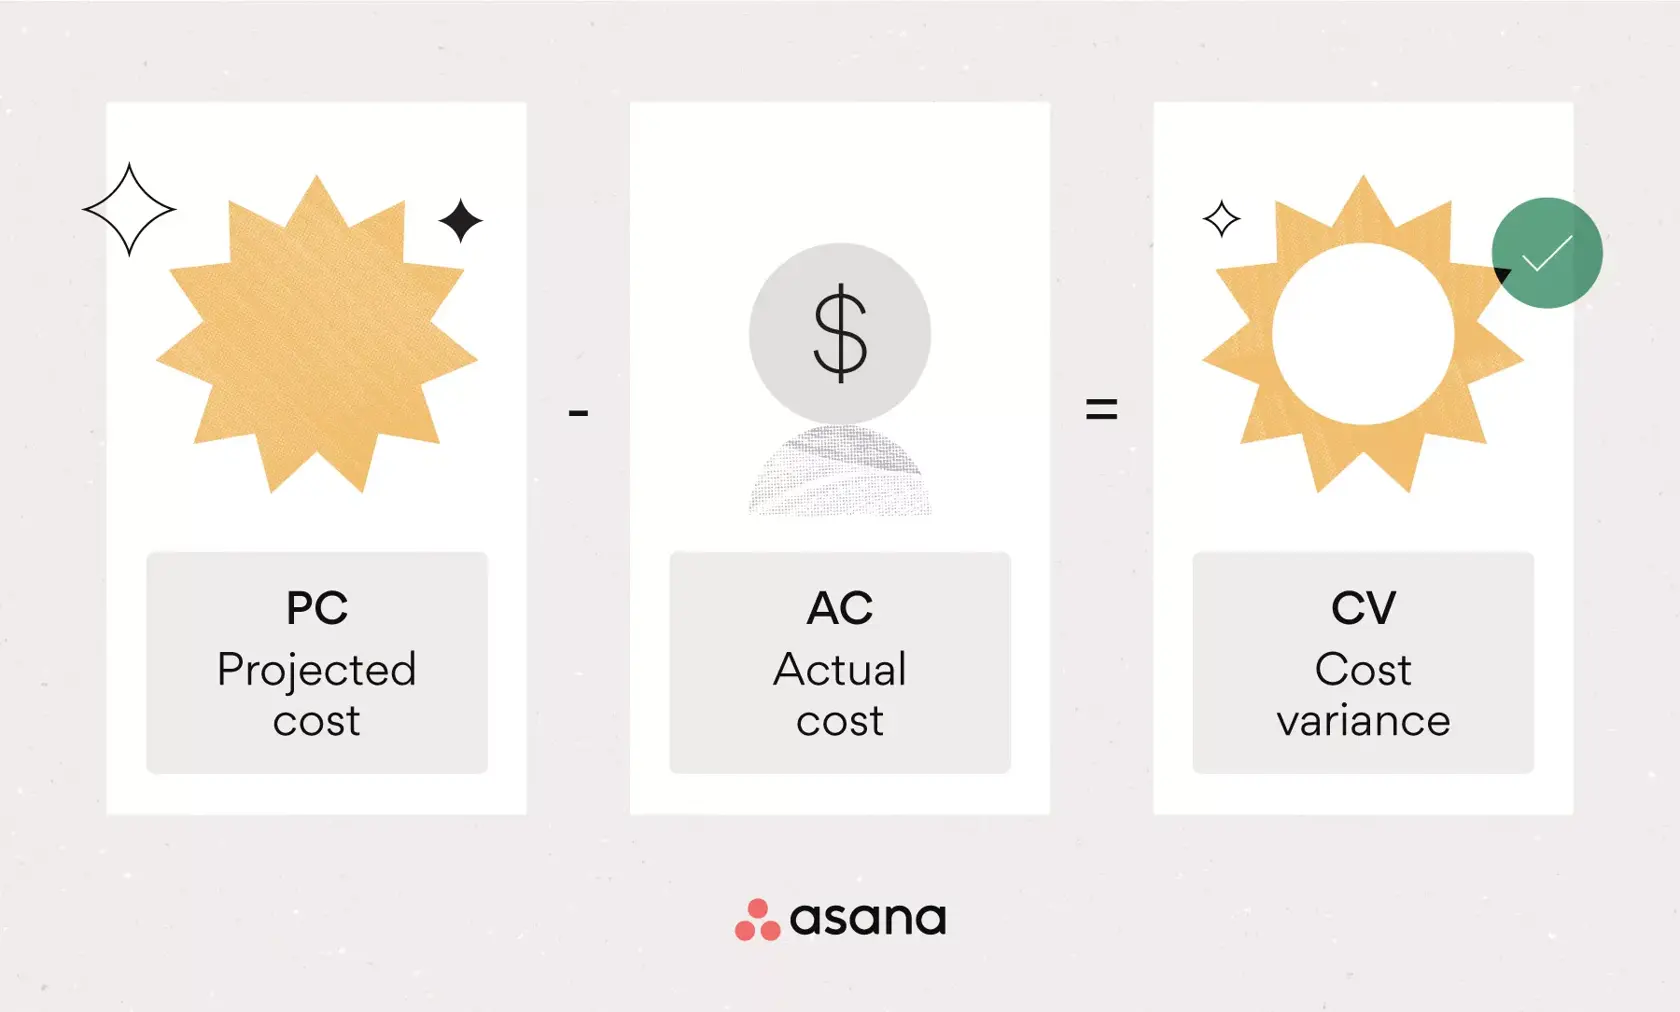 [inline illustration] What is cost variance (infographic)